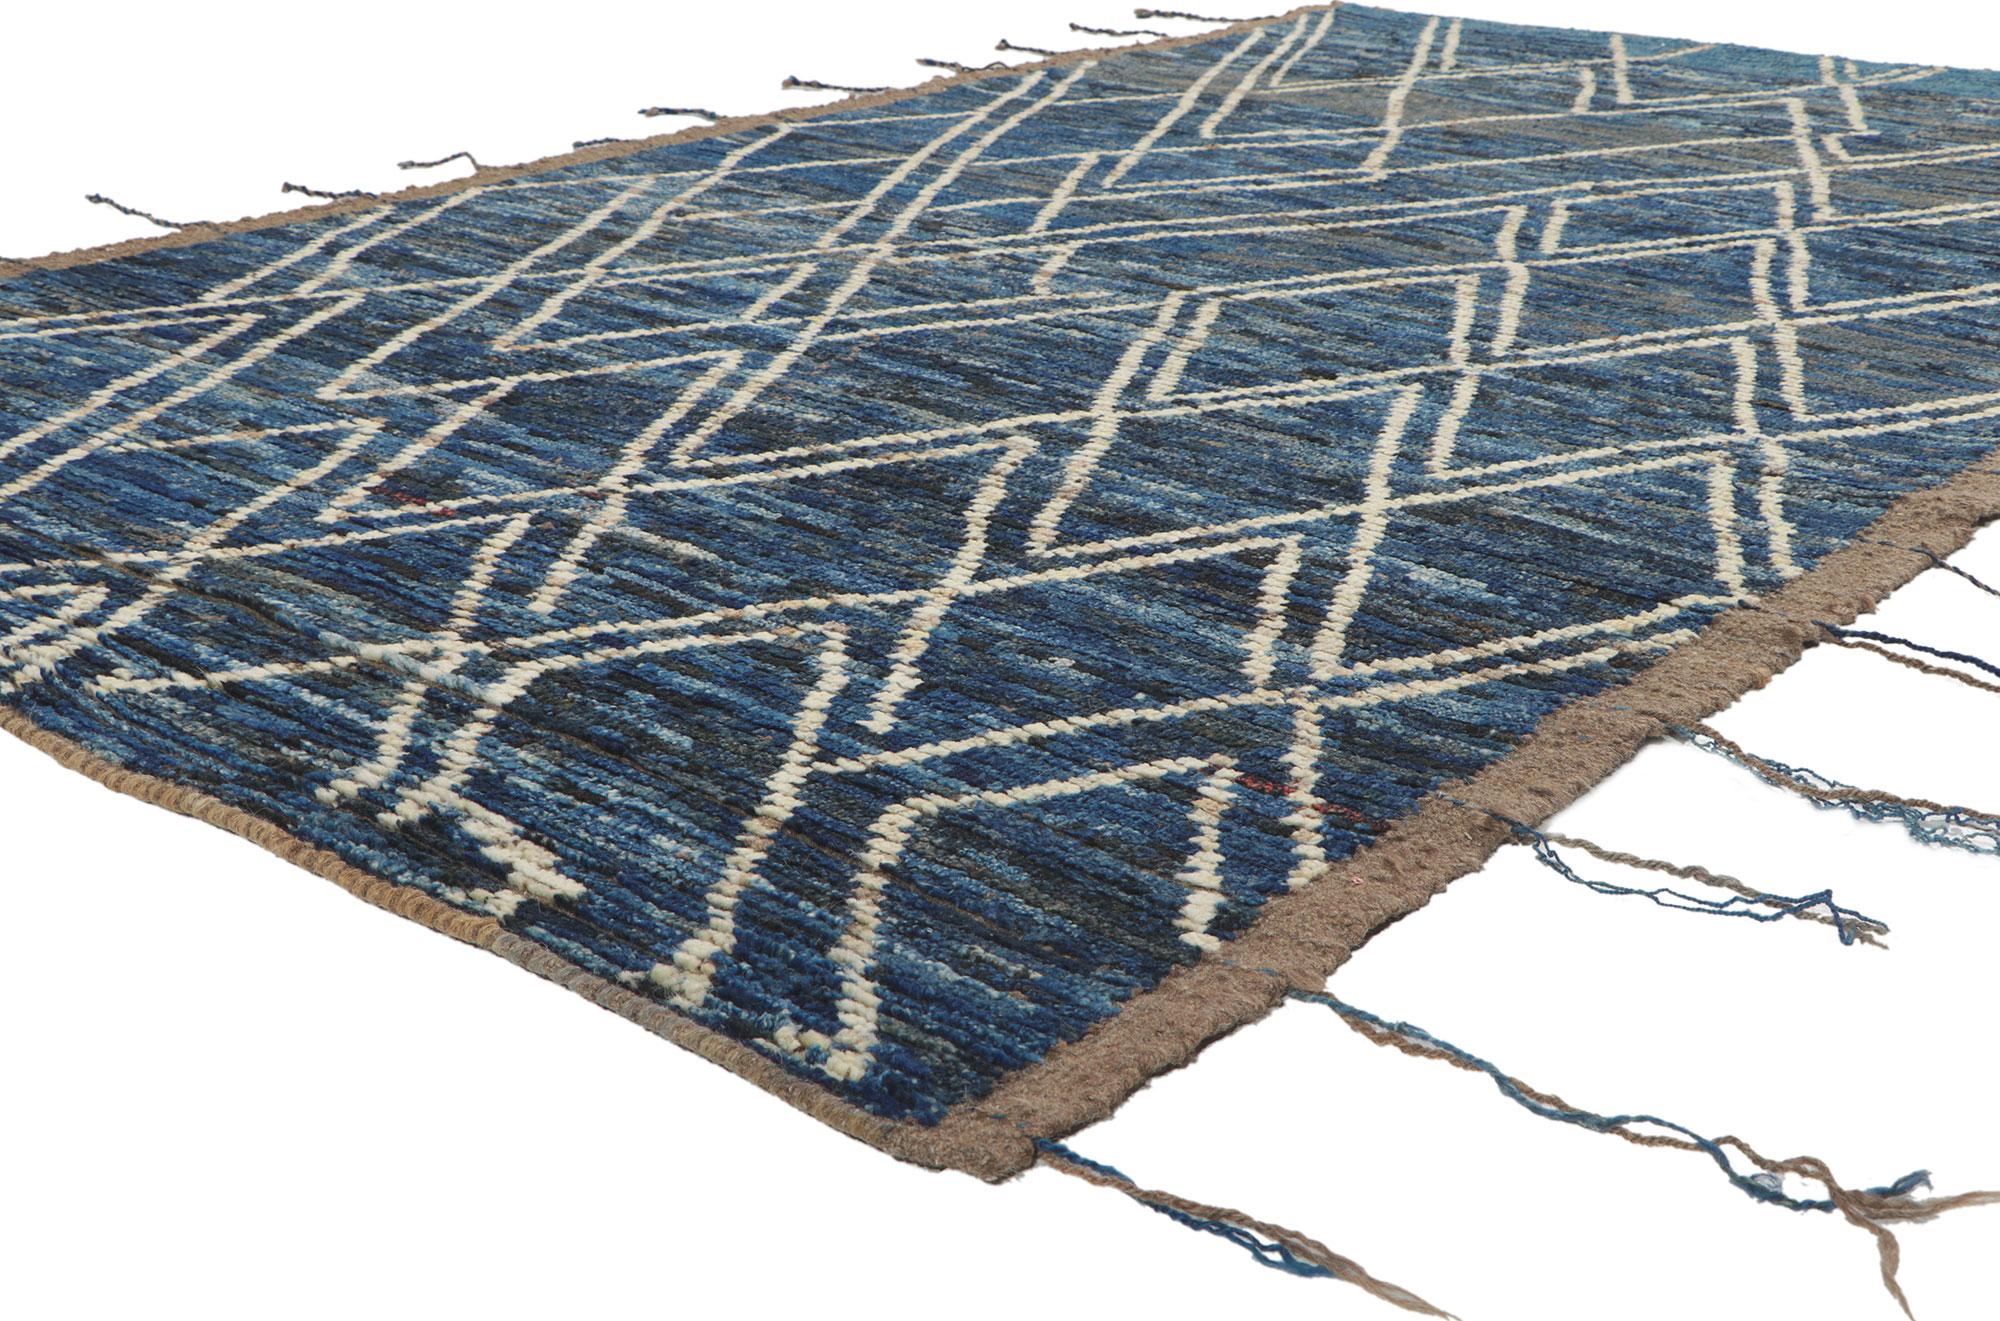 80821 Modern Earth-Tone Moroccan Area Rug with Short Pile, 05'08 x 08'10. In the veiled realm of contemporary allure, behold the mystique embodied in this hand-knotted wool masterpiece—an enchanting Moroccan rug that transcends time with its modern